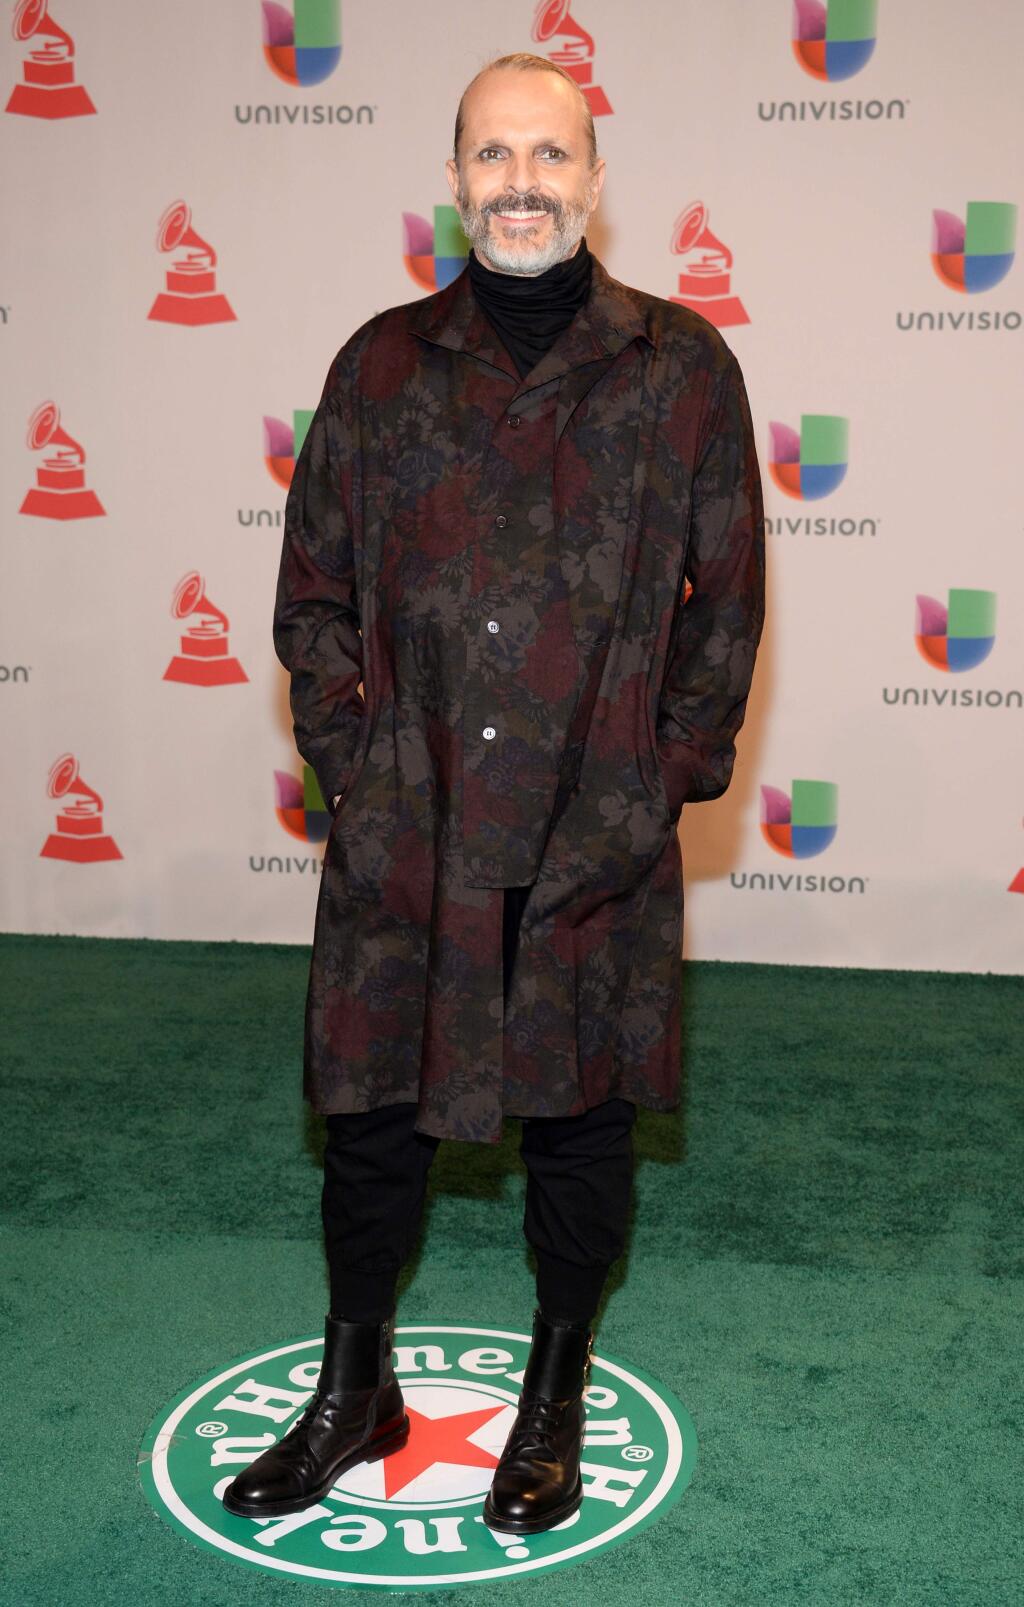 Miguel Bose arrives at the 15th annual Latin Grammy Awards at the MGM Grand Garden Arena on Thursday, Nov. 20, 2014, in Las Vegas. (Photo by Al Powers/Invision/AP)